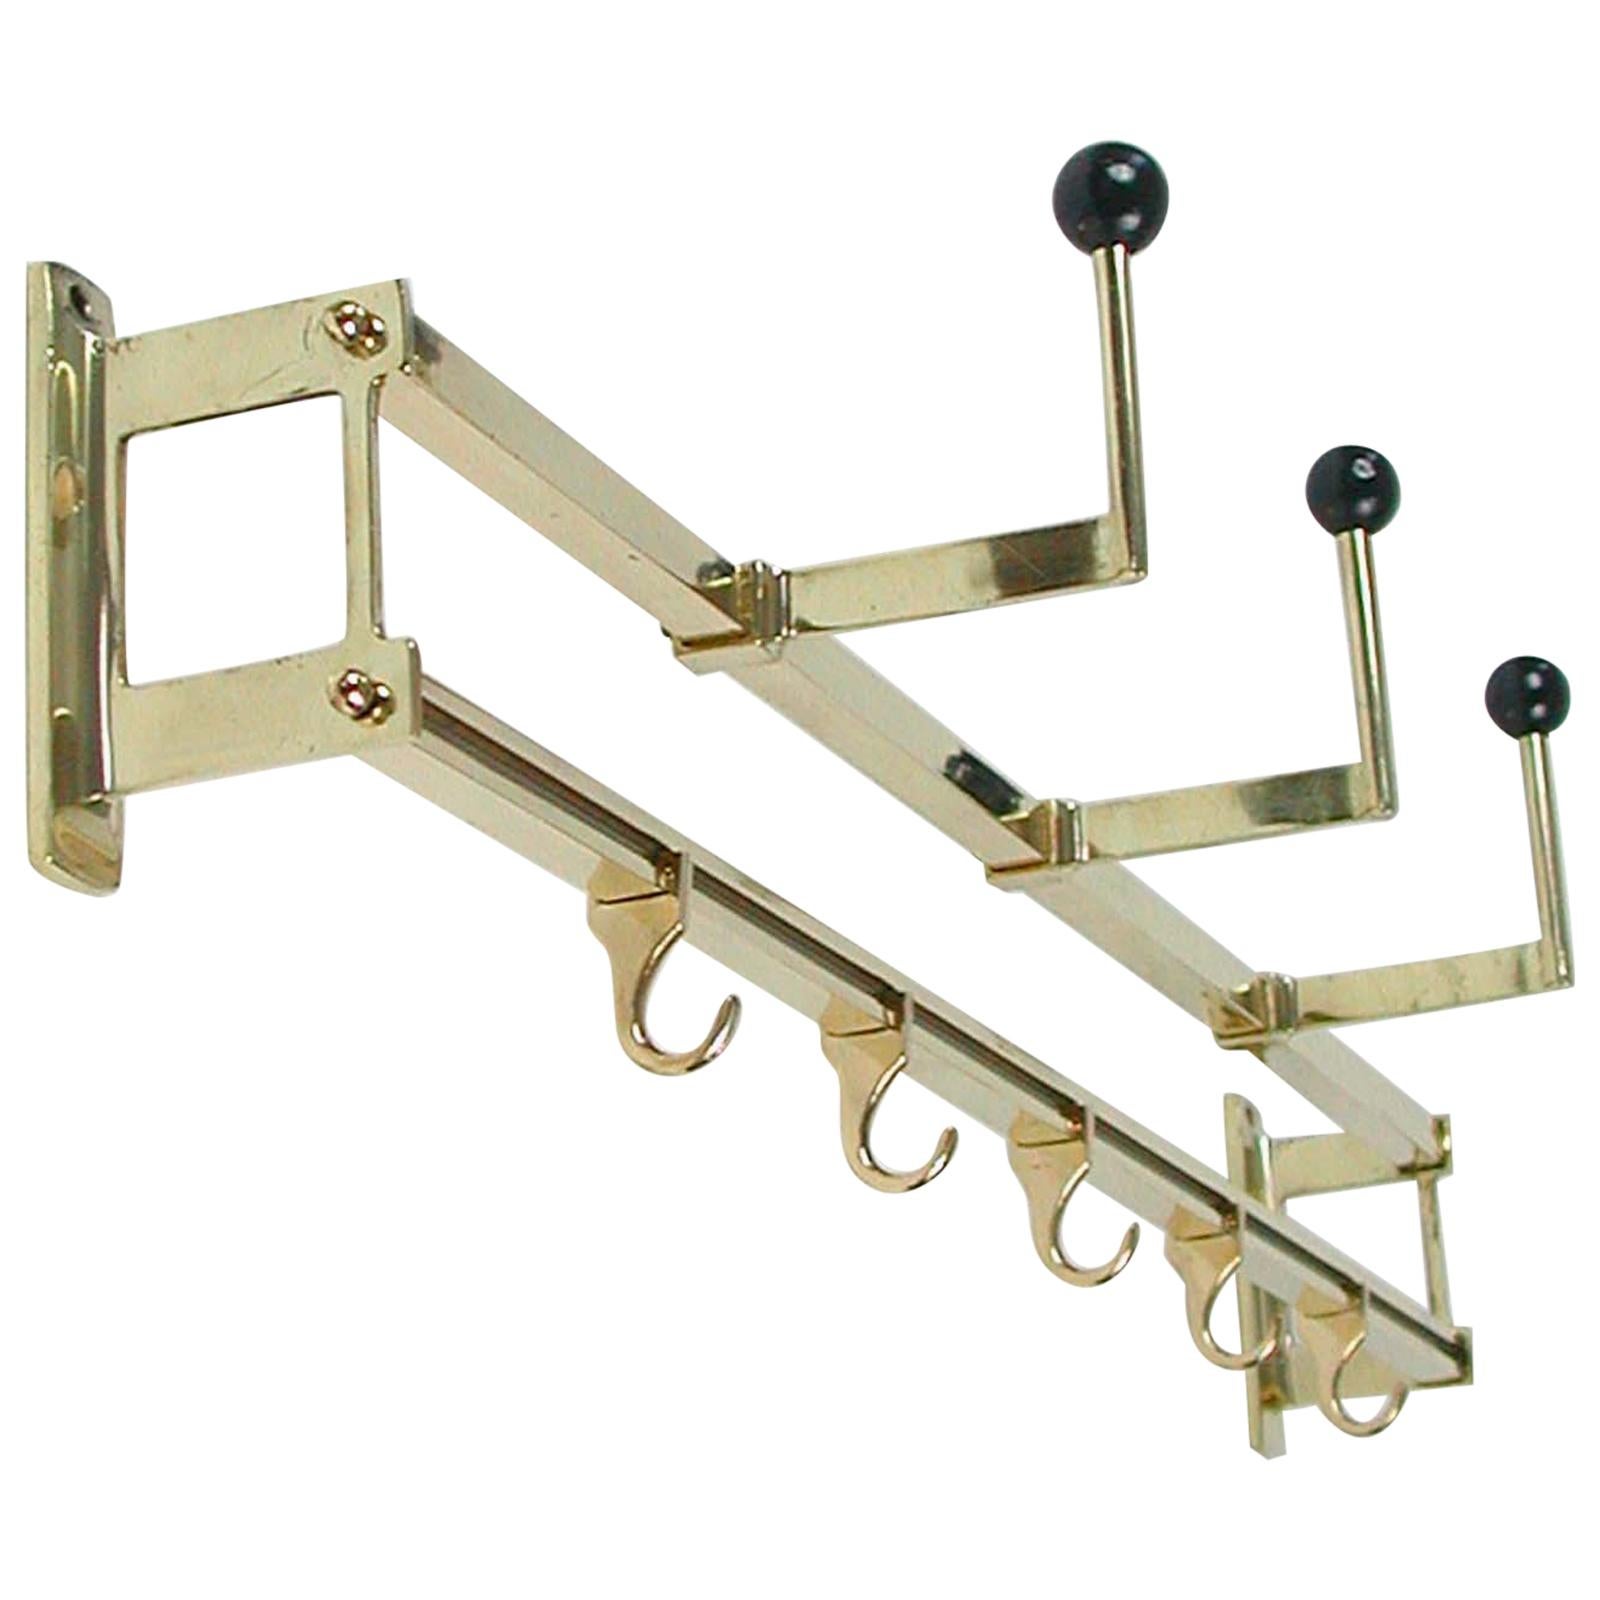 1930s Art Deco Bauhaus Brass and Wood Coat and Hat Rack